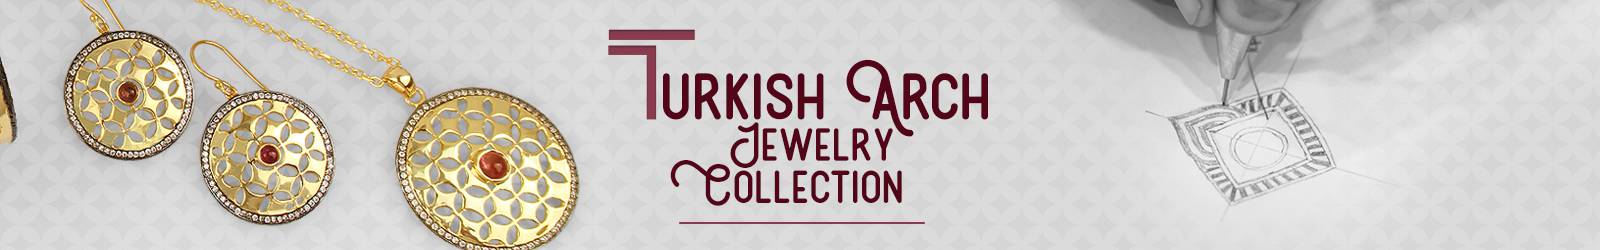 Turkish arch jewelry collection